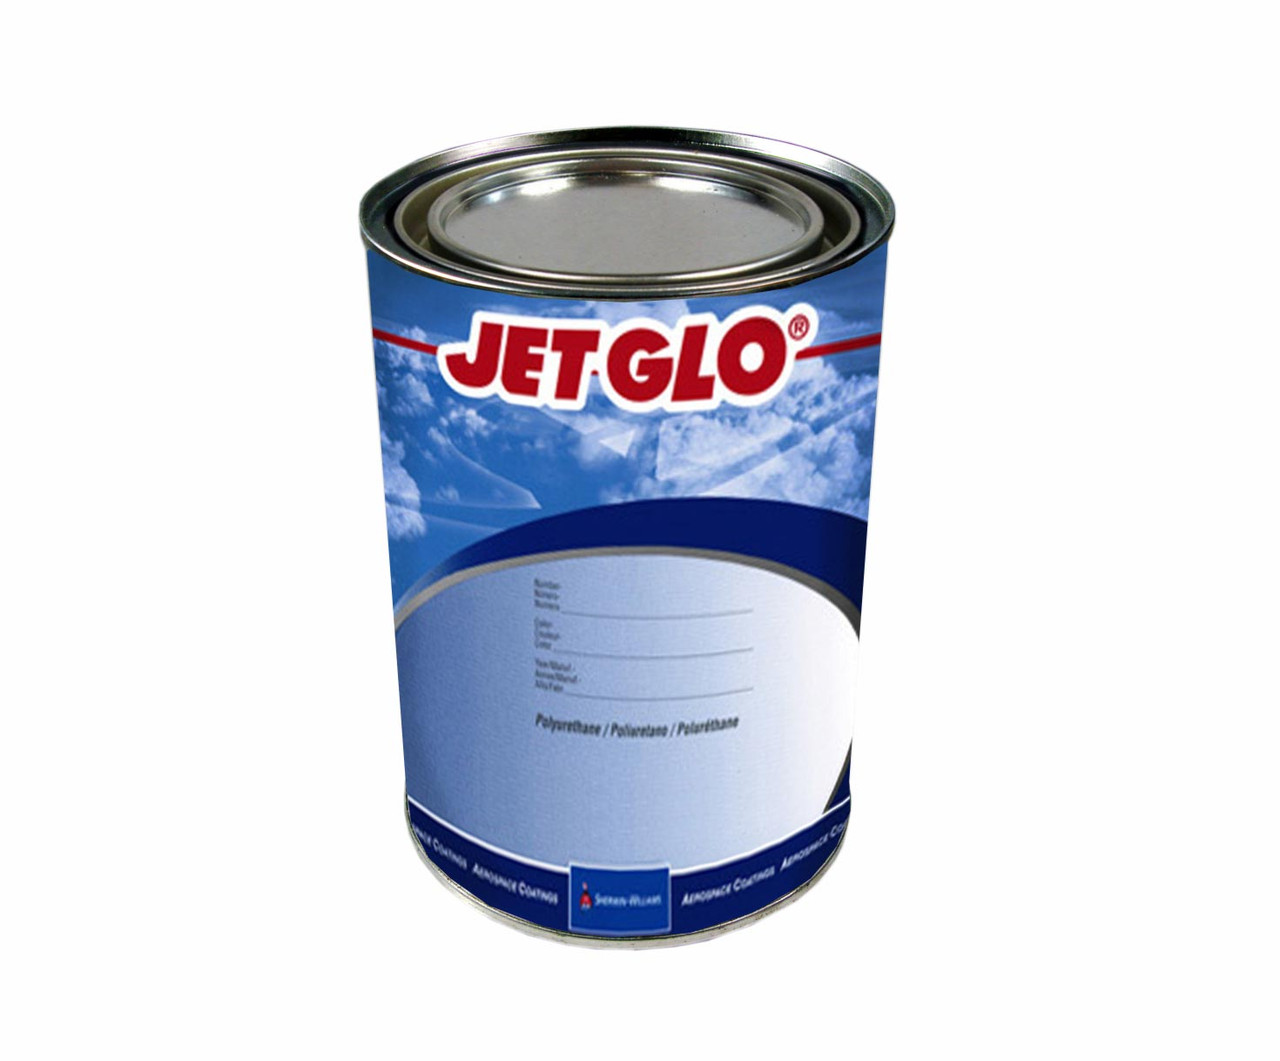 Sherwin-Williams CM0570527 JET GLO Off-White Polyester Urethane Topcoat  Paint - Gallon Can at 